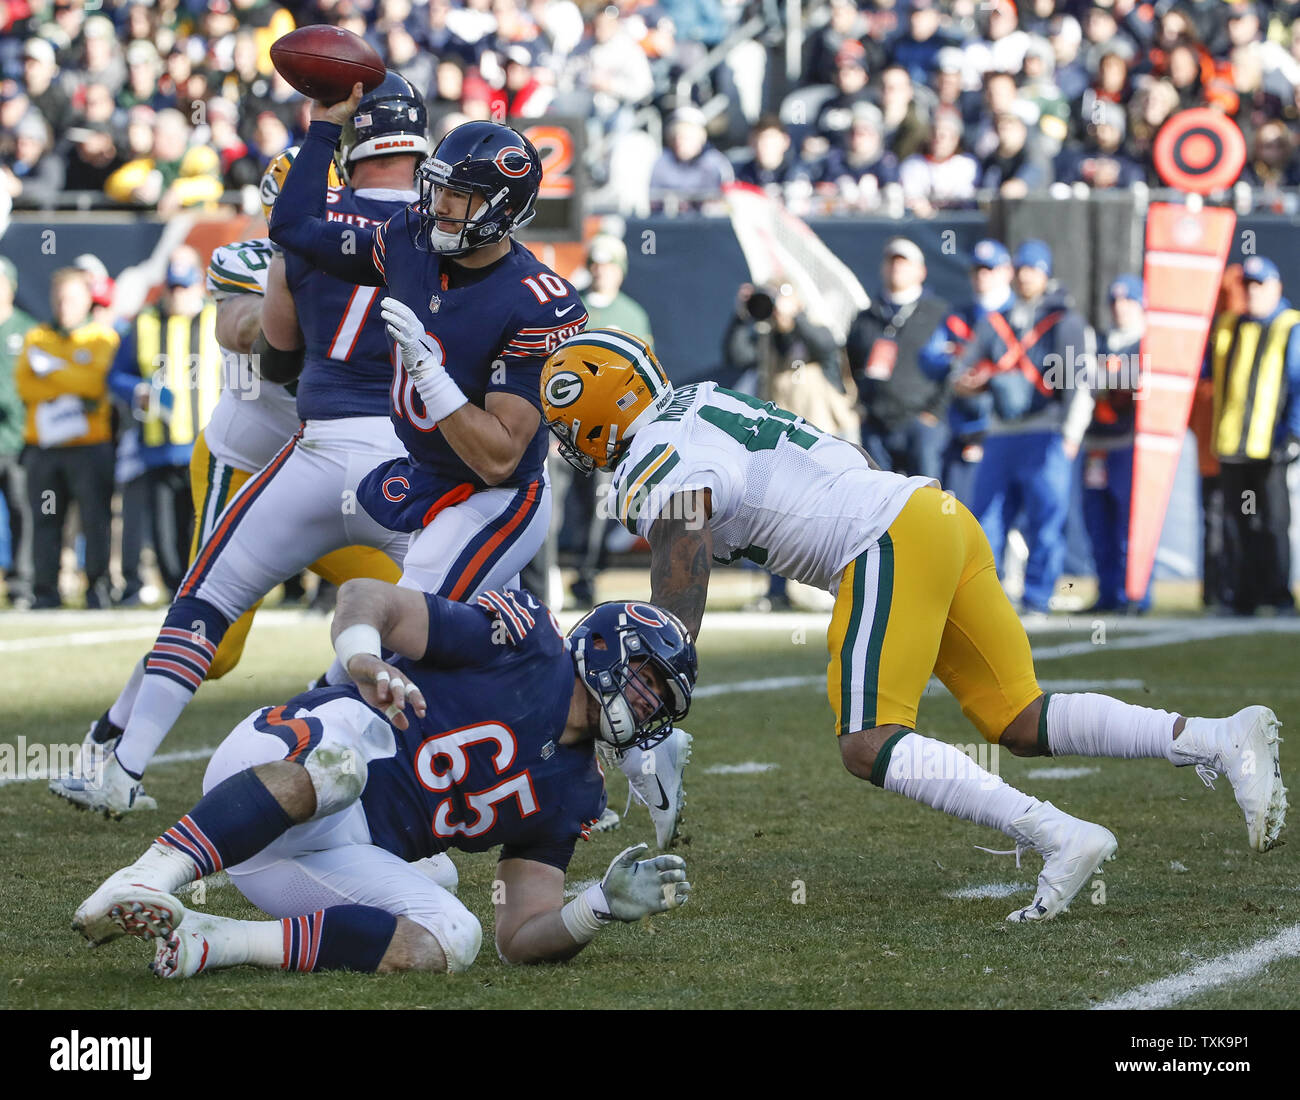 Chicago Bears quarterback Mitchell Trubisky (10) passes the ball against Green Bay Packers inside linebacker Antonio Morrison (44) during the first half at Soldier Field in Chicago on December 16, 2018. Photo by Kamil Krzaczynski/UPI Stock Photo